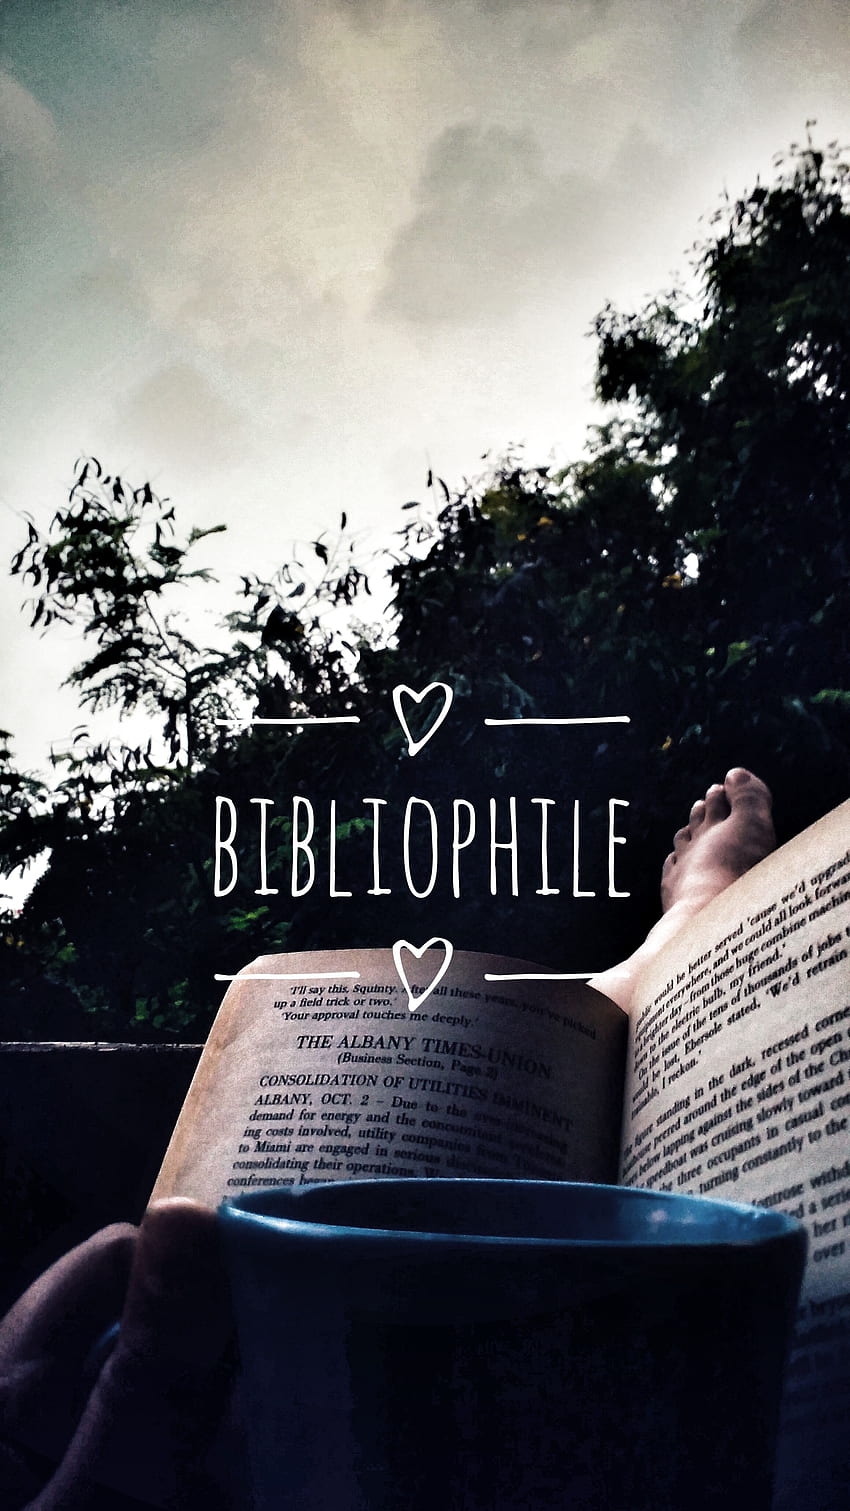 1366x768px, 720P Free download Bibliophile. Book , Quotes for book